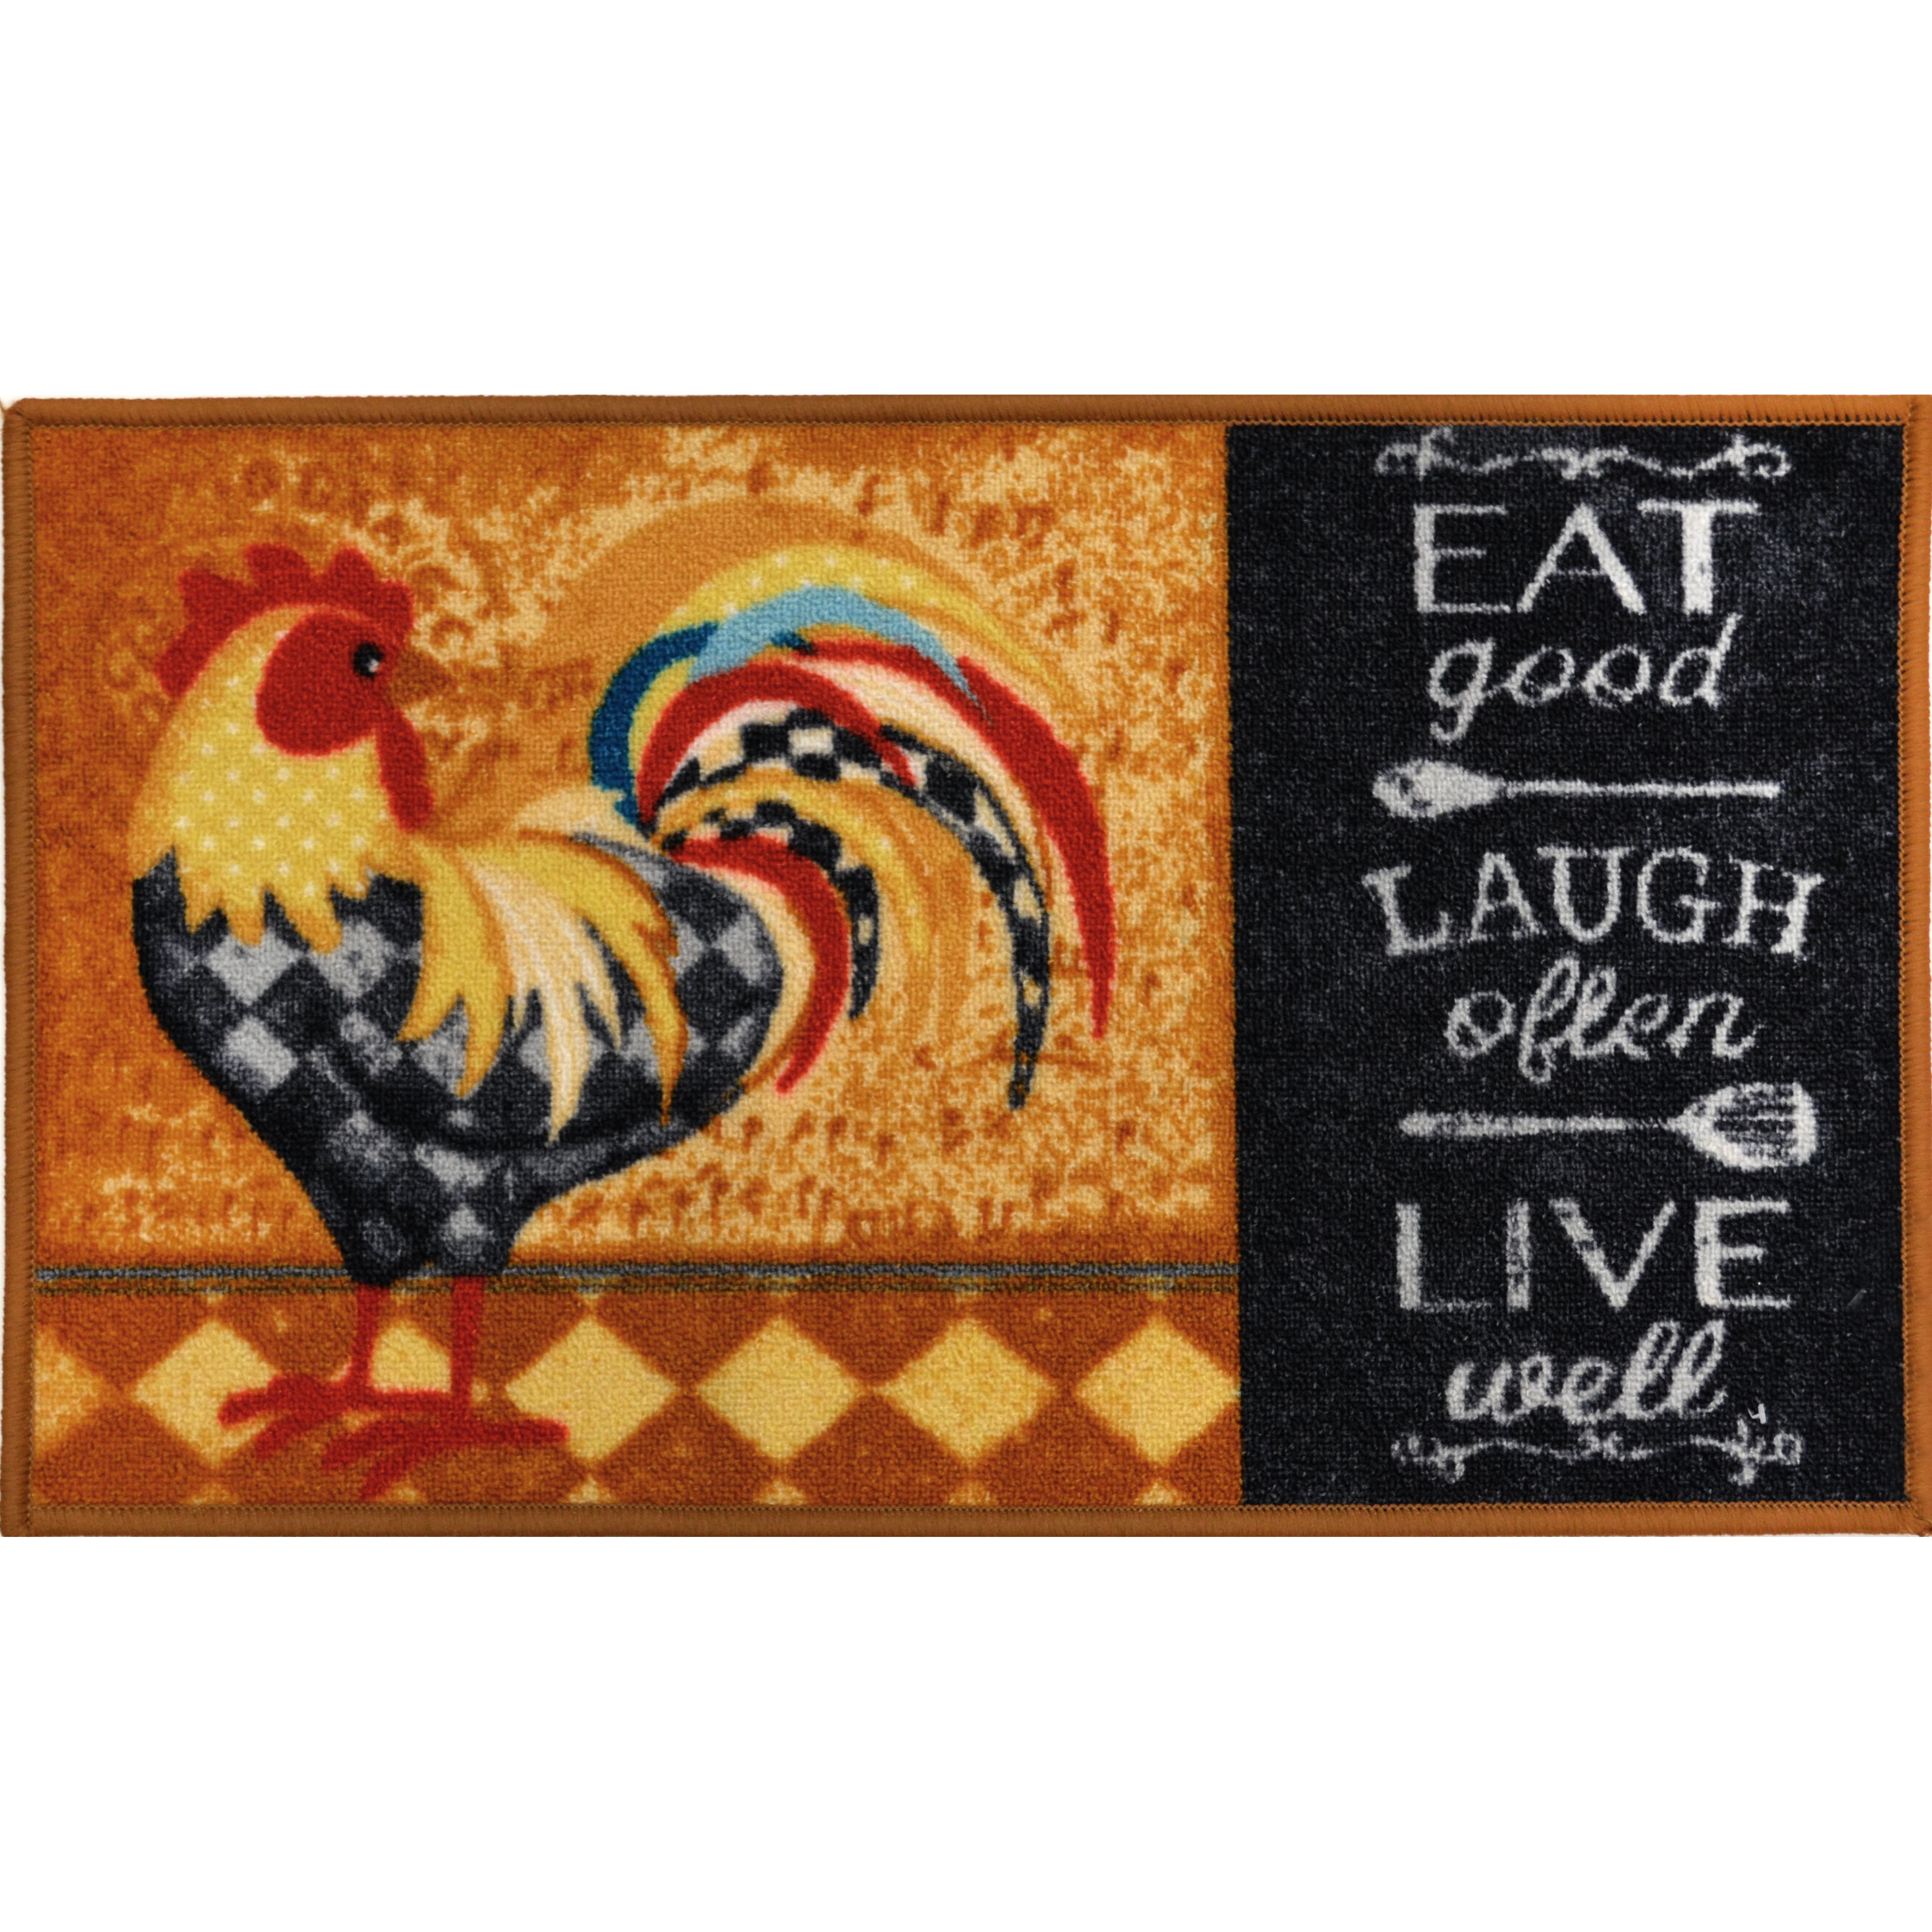 ROOSTER,EAT GOOD LAUGH OFTEN LIVE WELL nonskid HD PRINTED NYLON RUG 18"x30" 